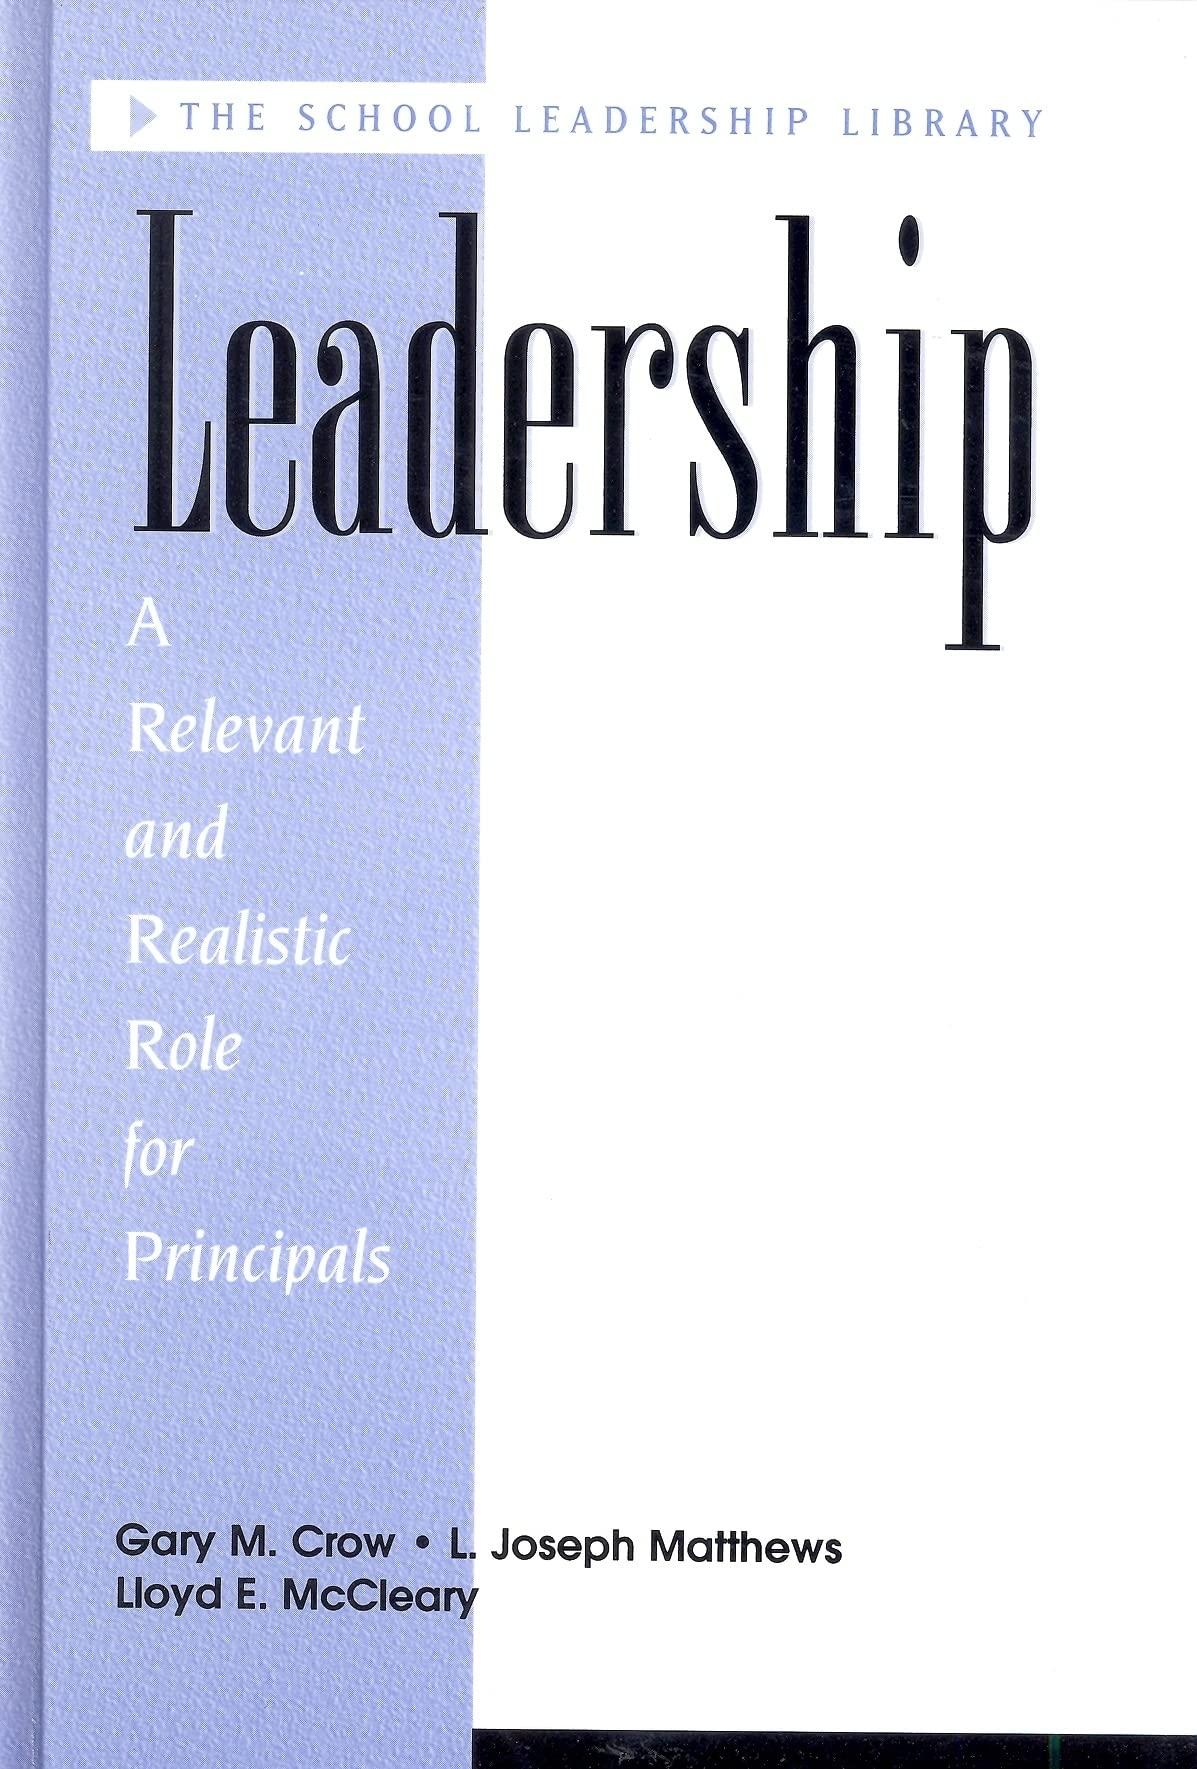 leadership a relevant and realistic role for principals 1st edition lloyd e. mc cleary, gary m. crow, l.